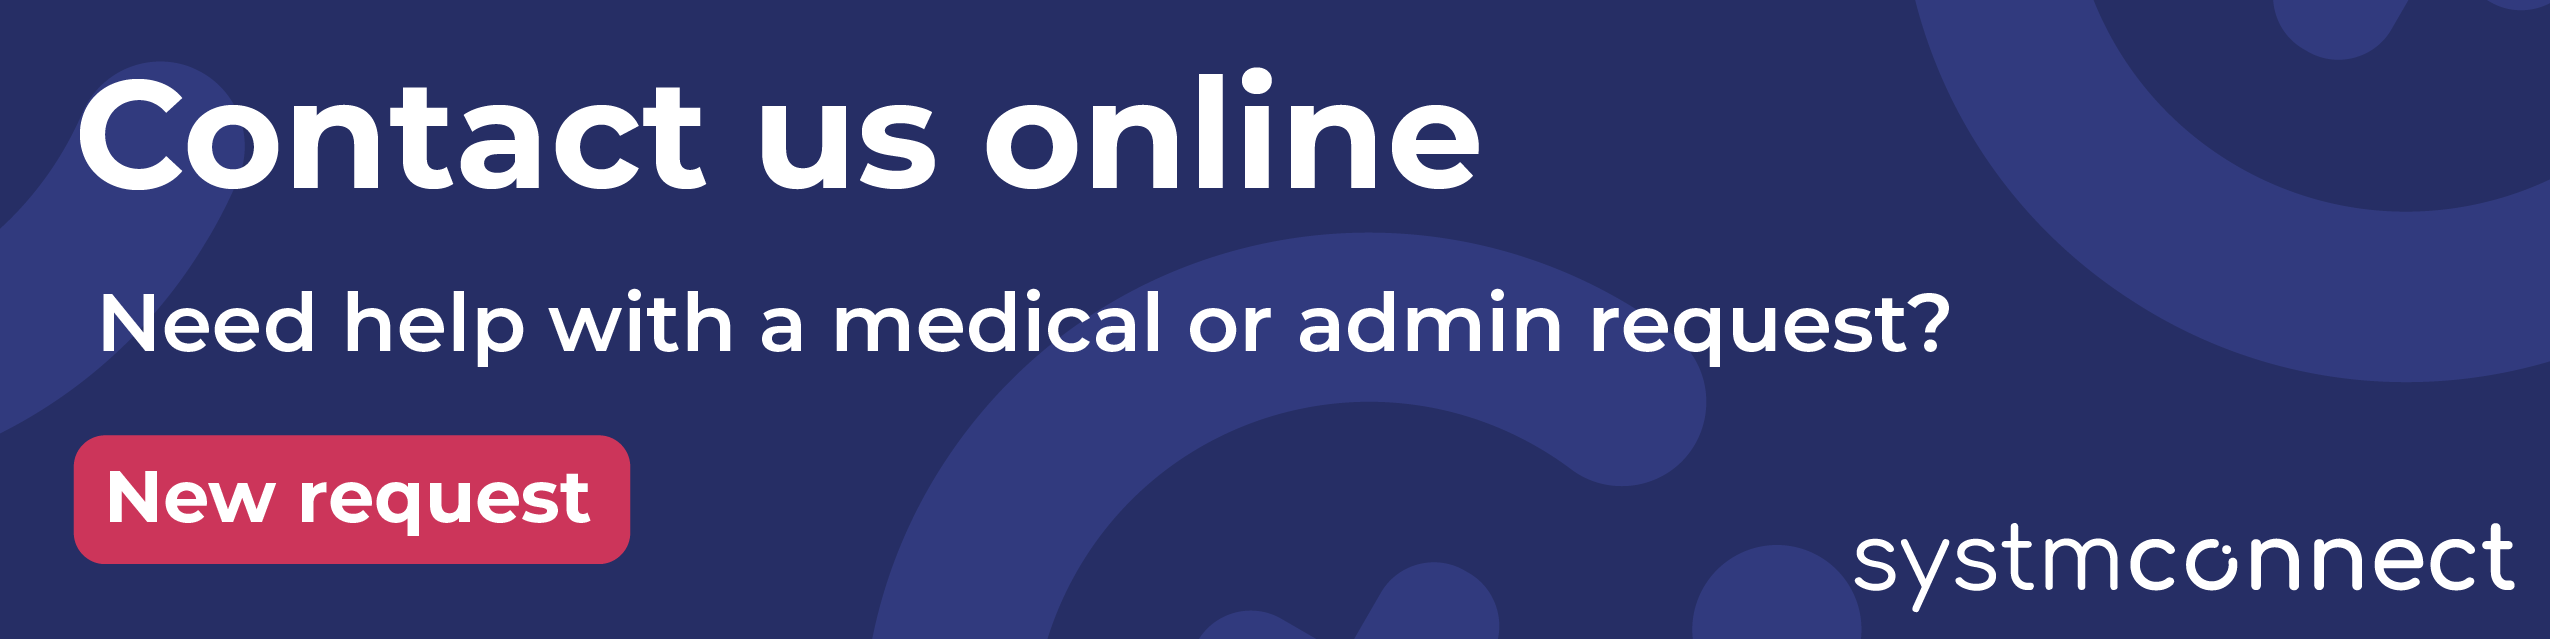 Contact us online if you need help with a non-urgent medical or admin request.